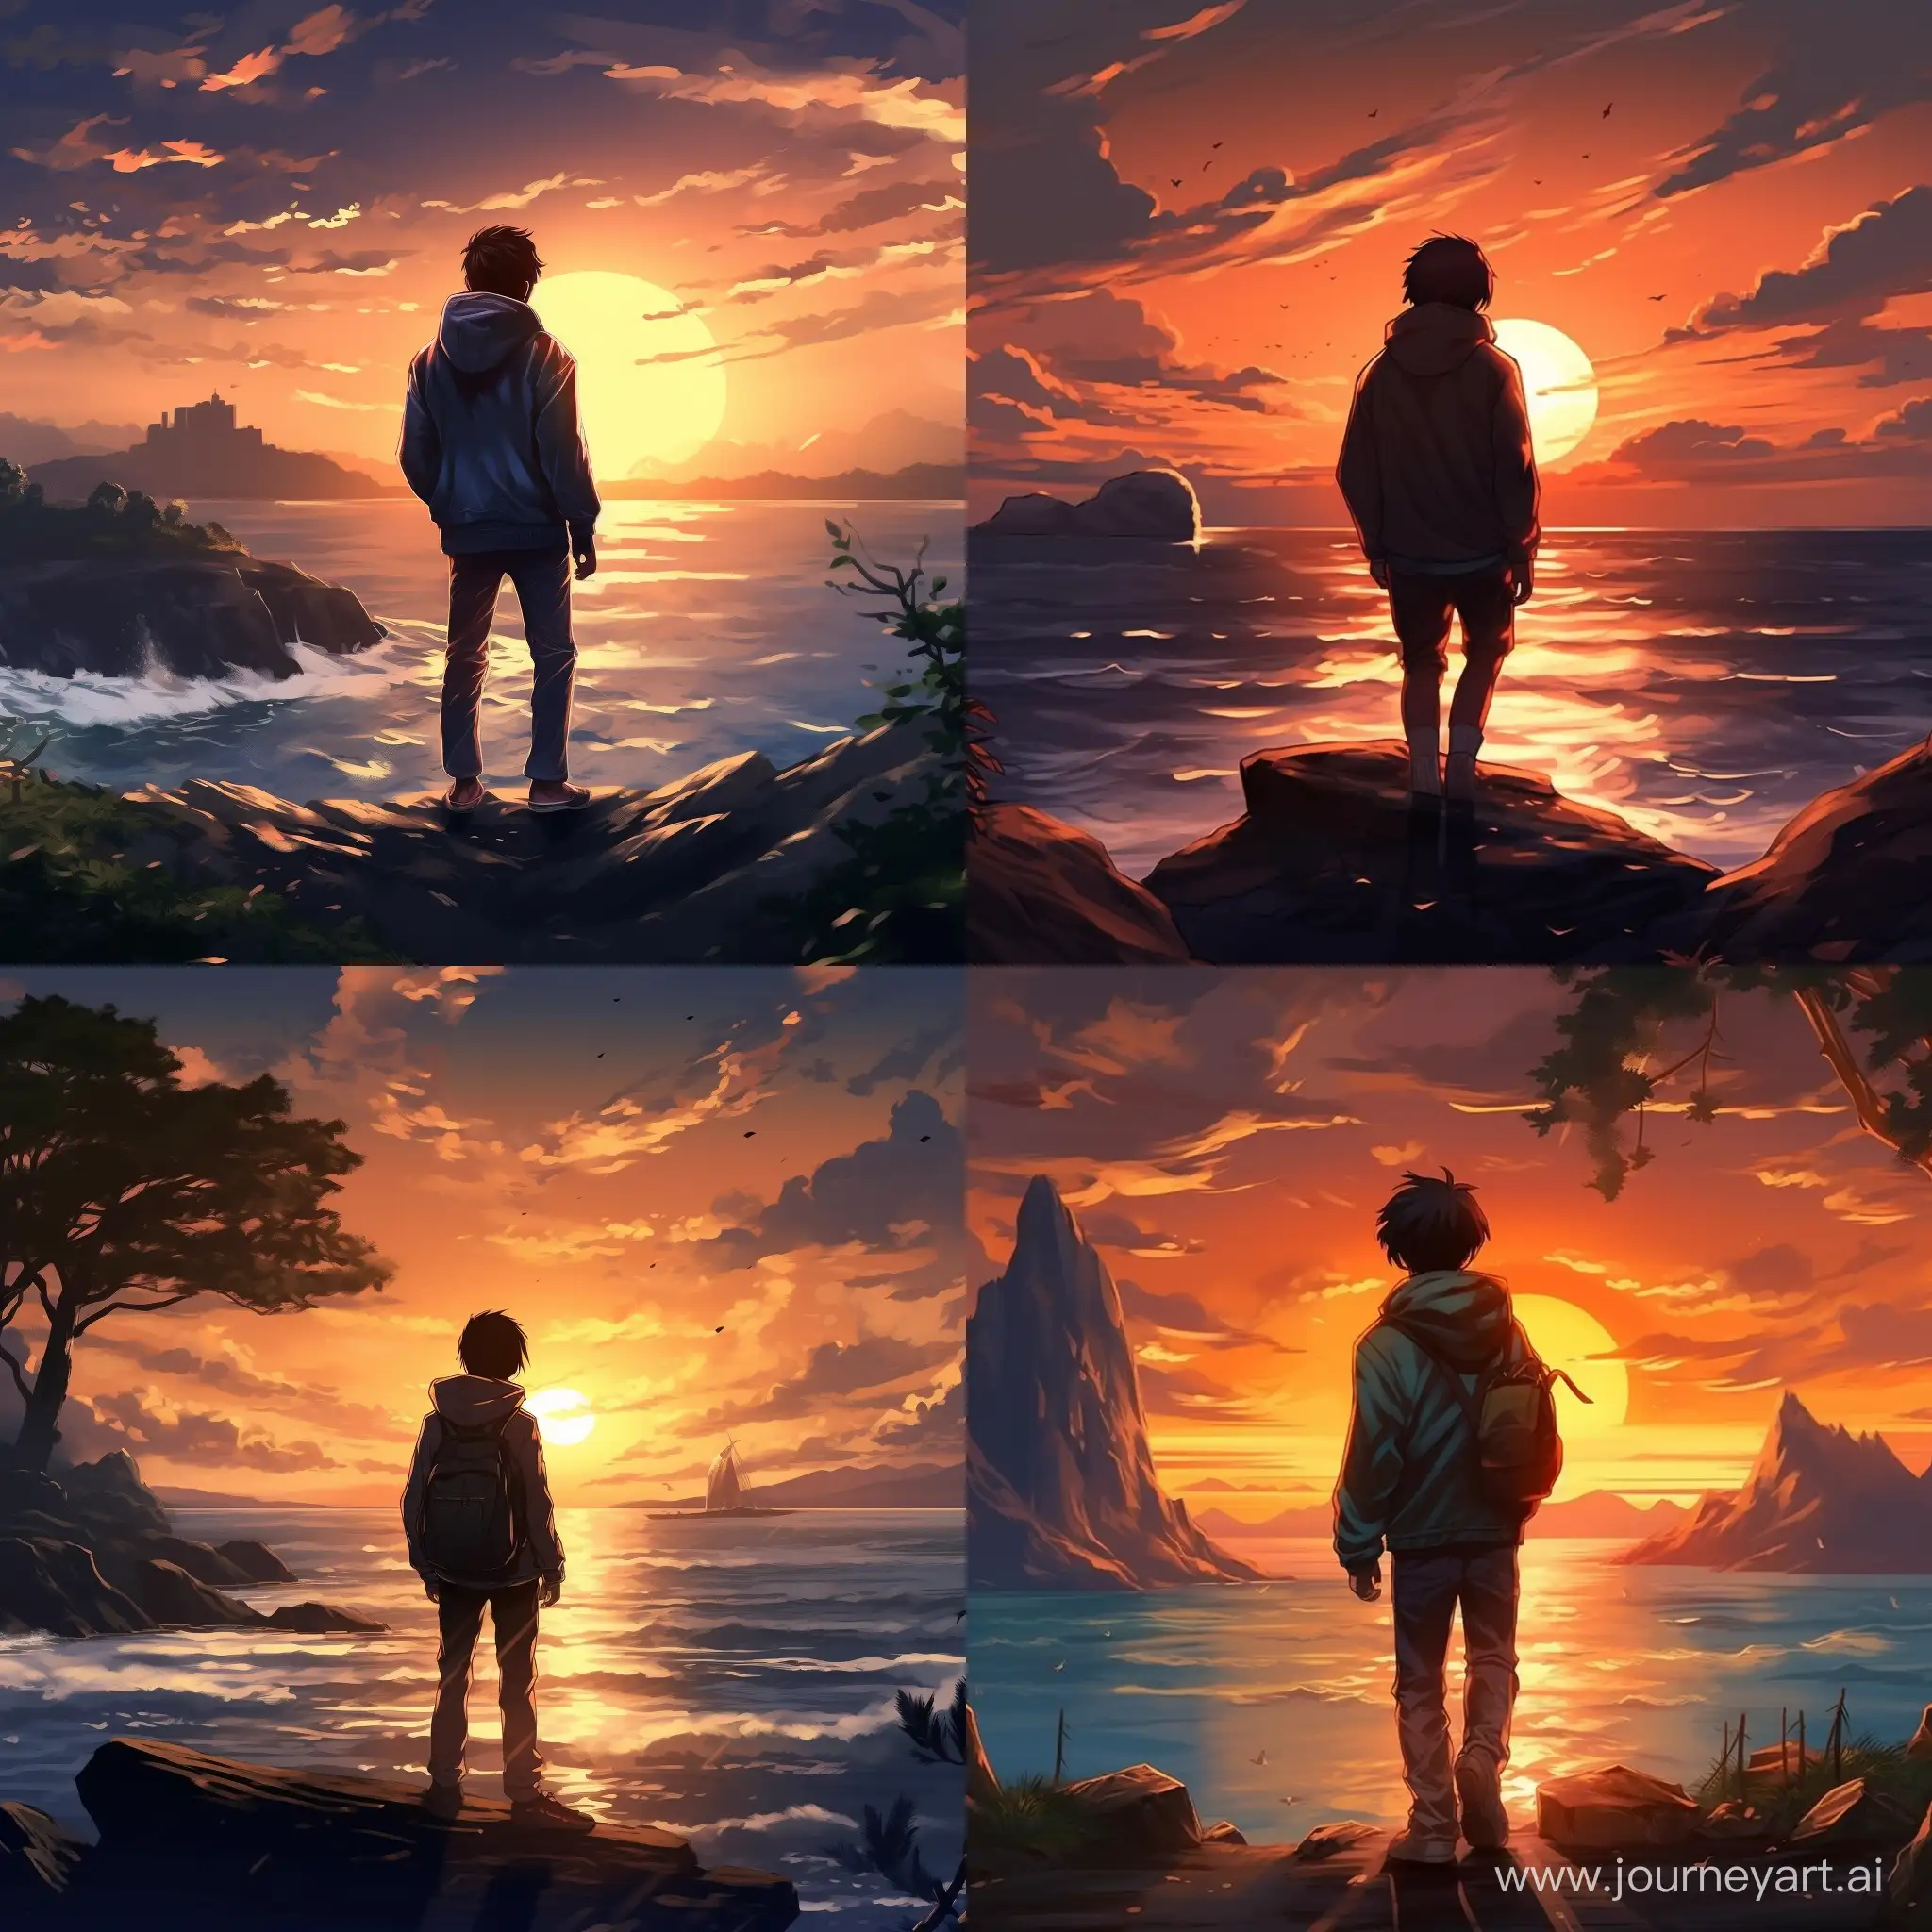 Create an image depicting a man from behind standing at the edge of the sea on a deserted island, dressed in a hoodie, with the sun setting on the horizon. The style of the image is that of an anime. The overall atmosphere should evoke both tranquility and wonder at the beauty of the seascape at dusk while also conveying a deep melancholy.